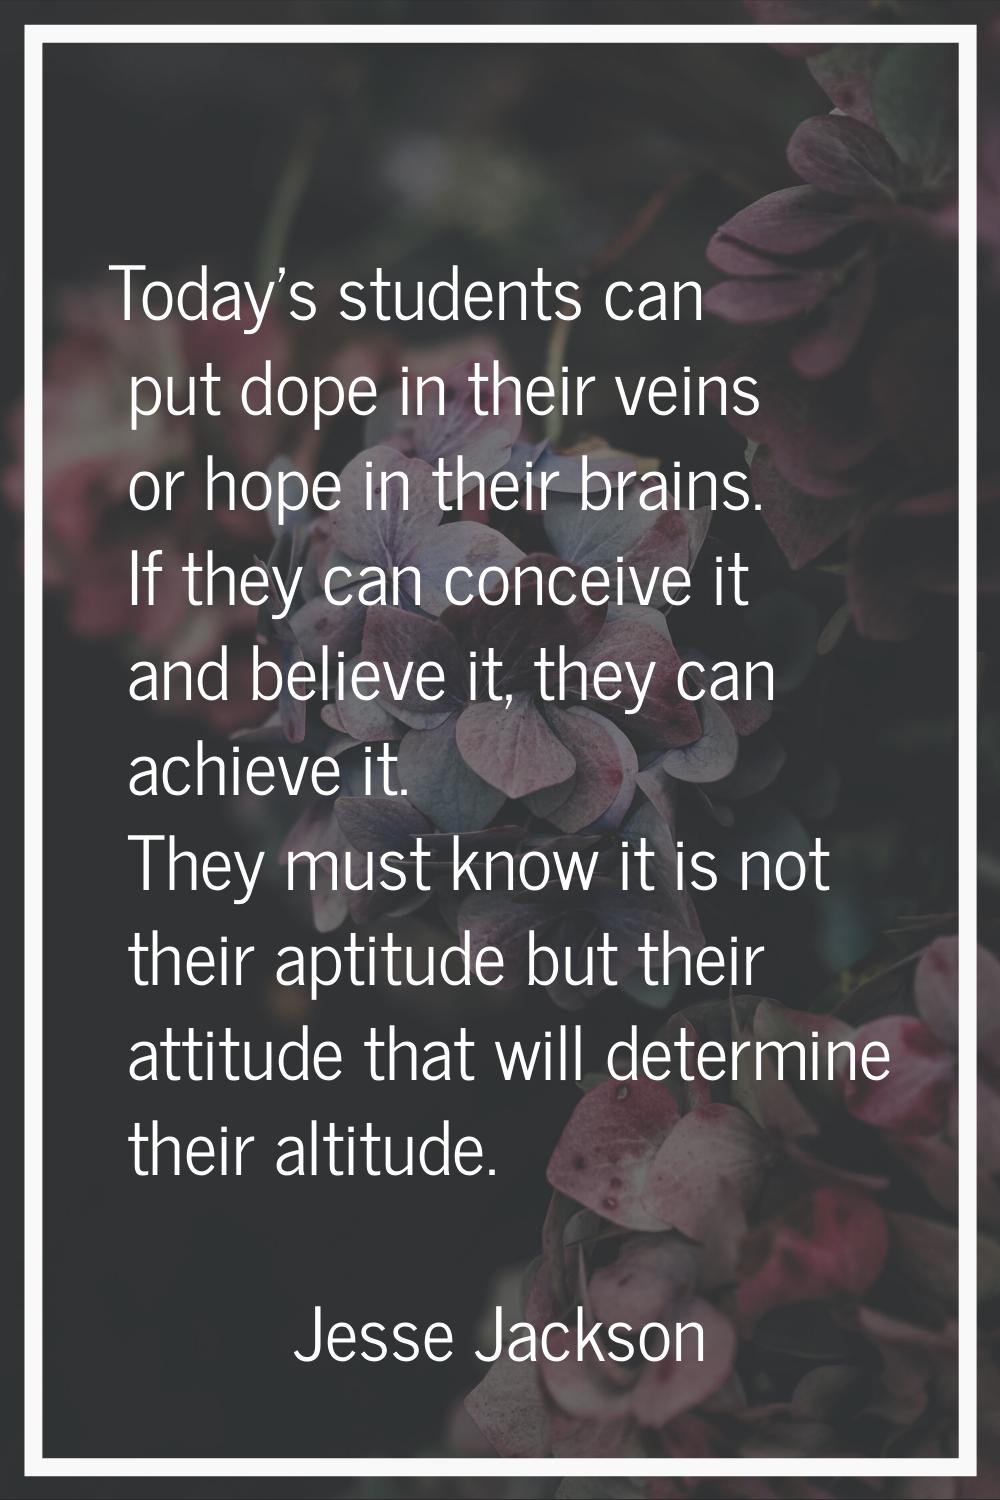 Today's students can put dope in their veins or hope in their brains. If they can conceive it and b